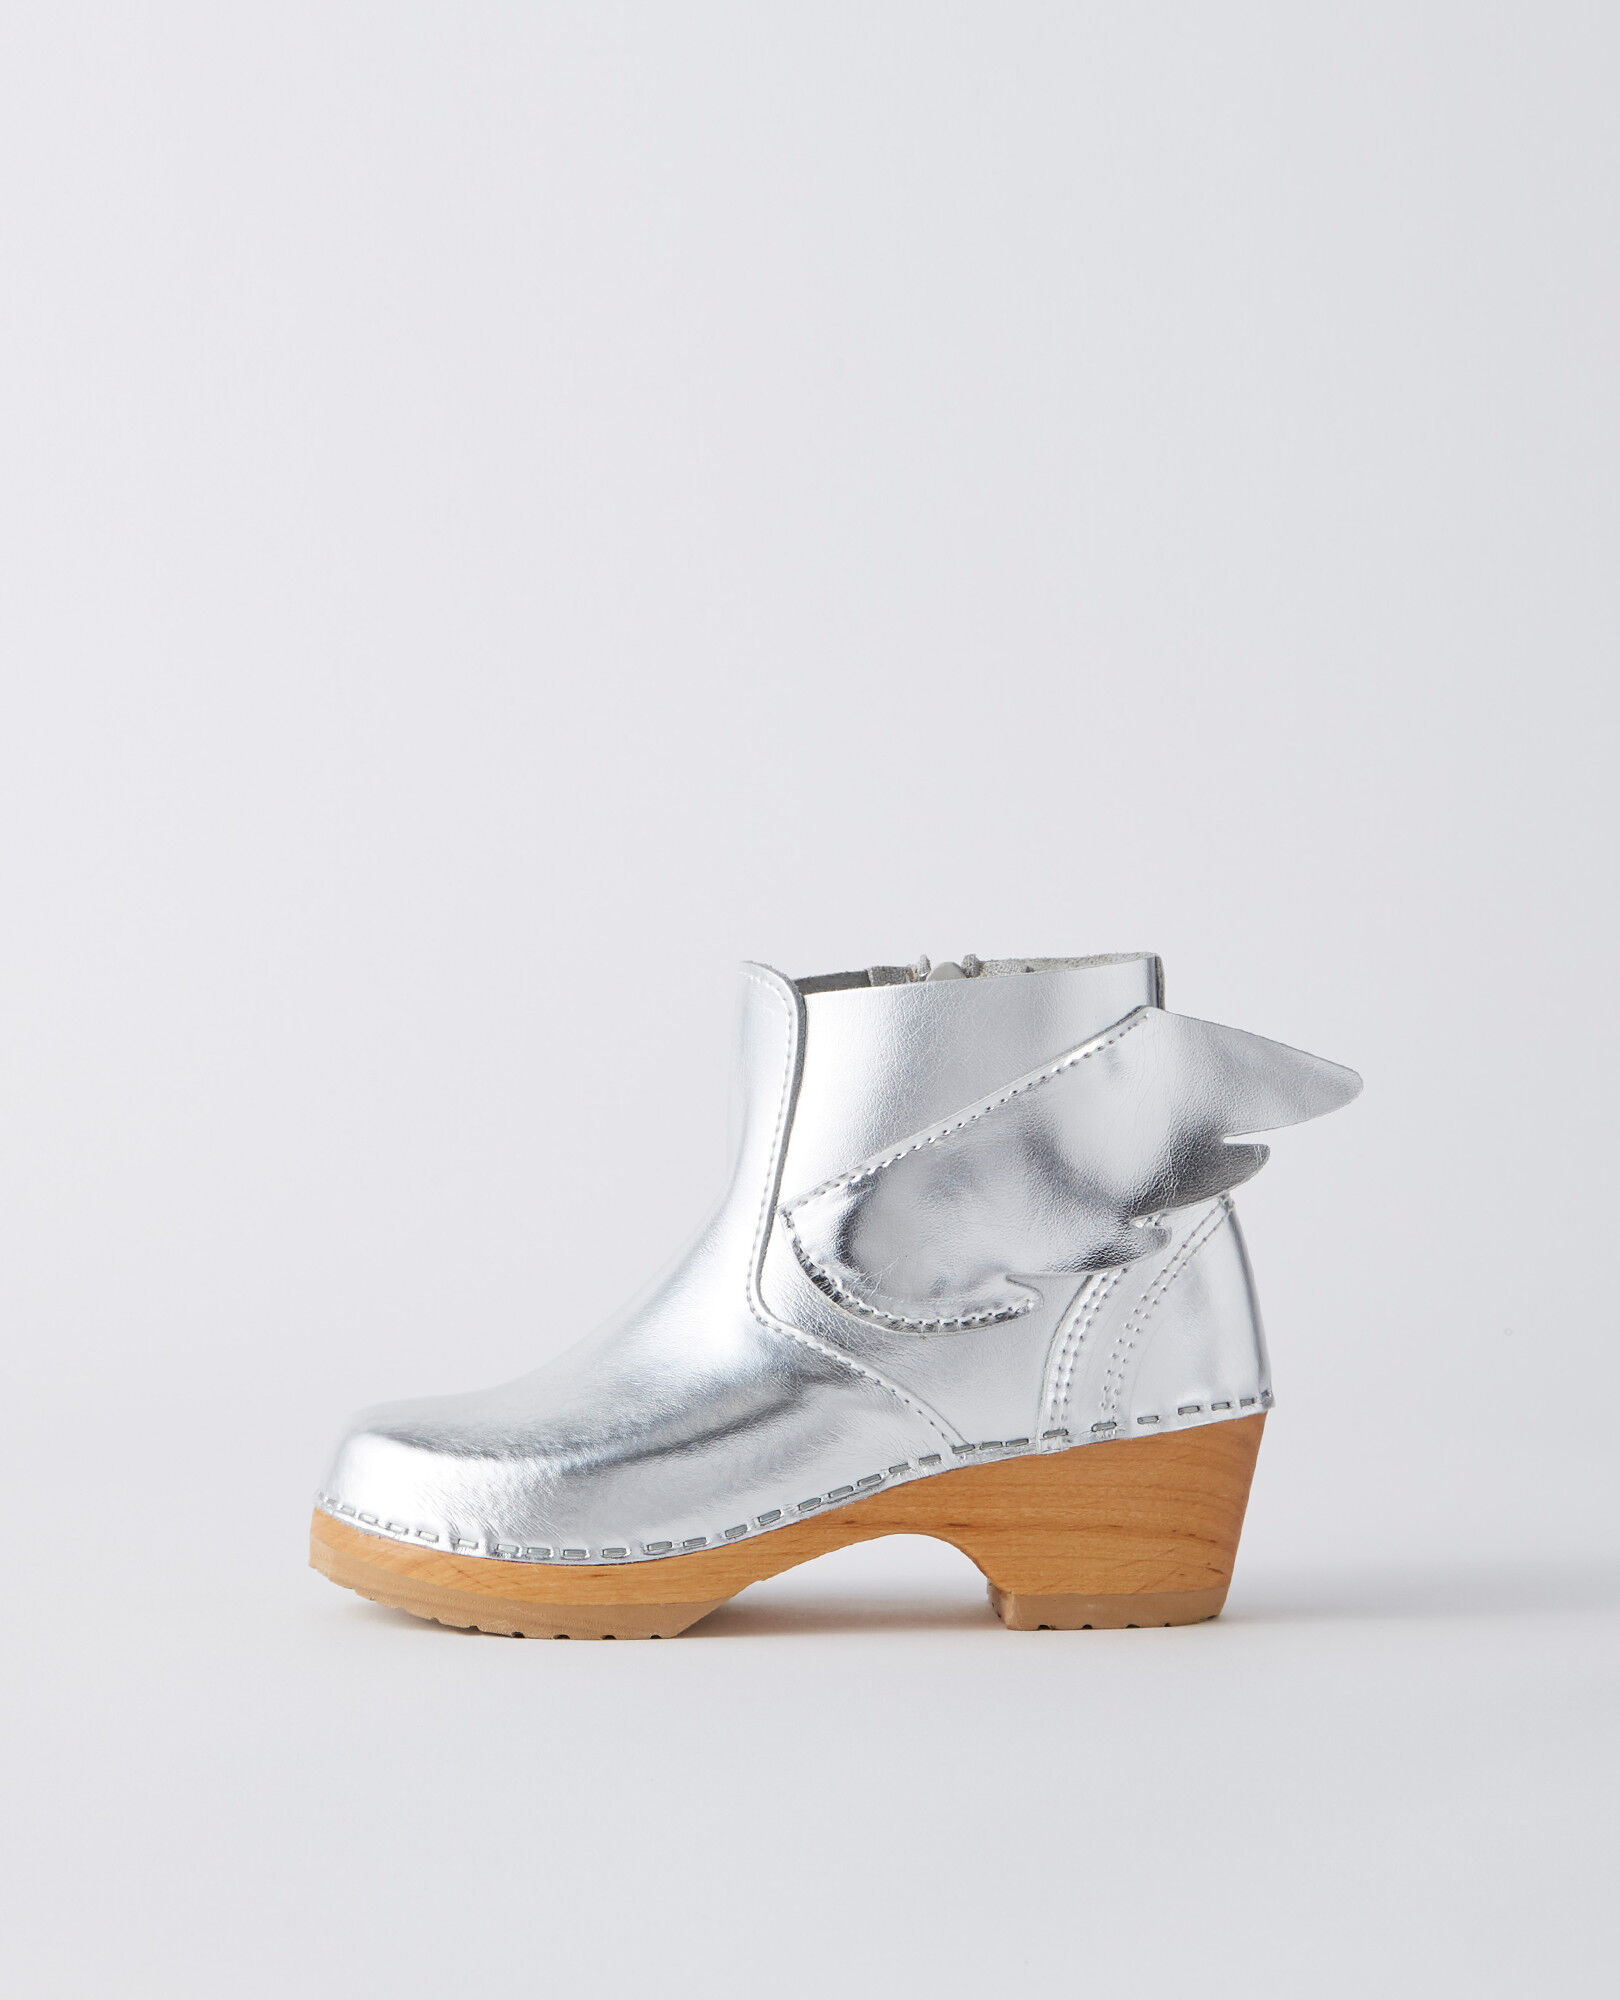 hanna andersson clogs